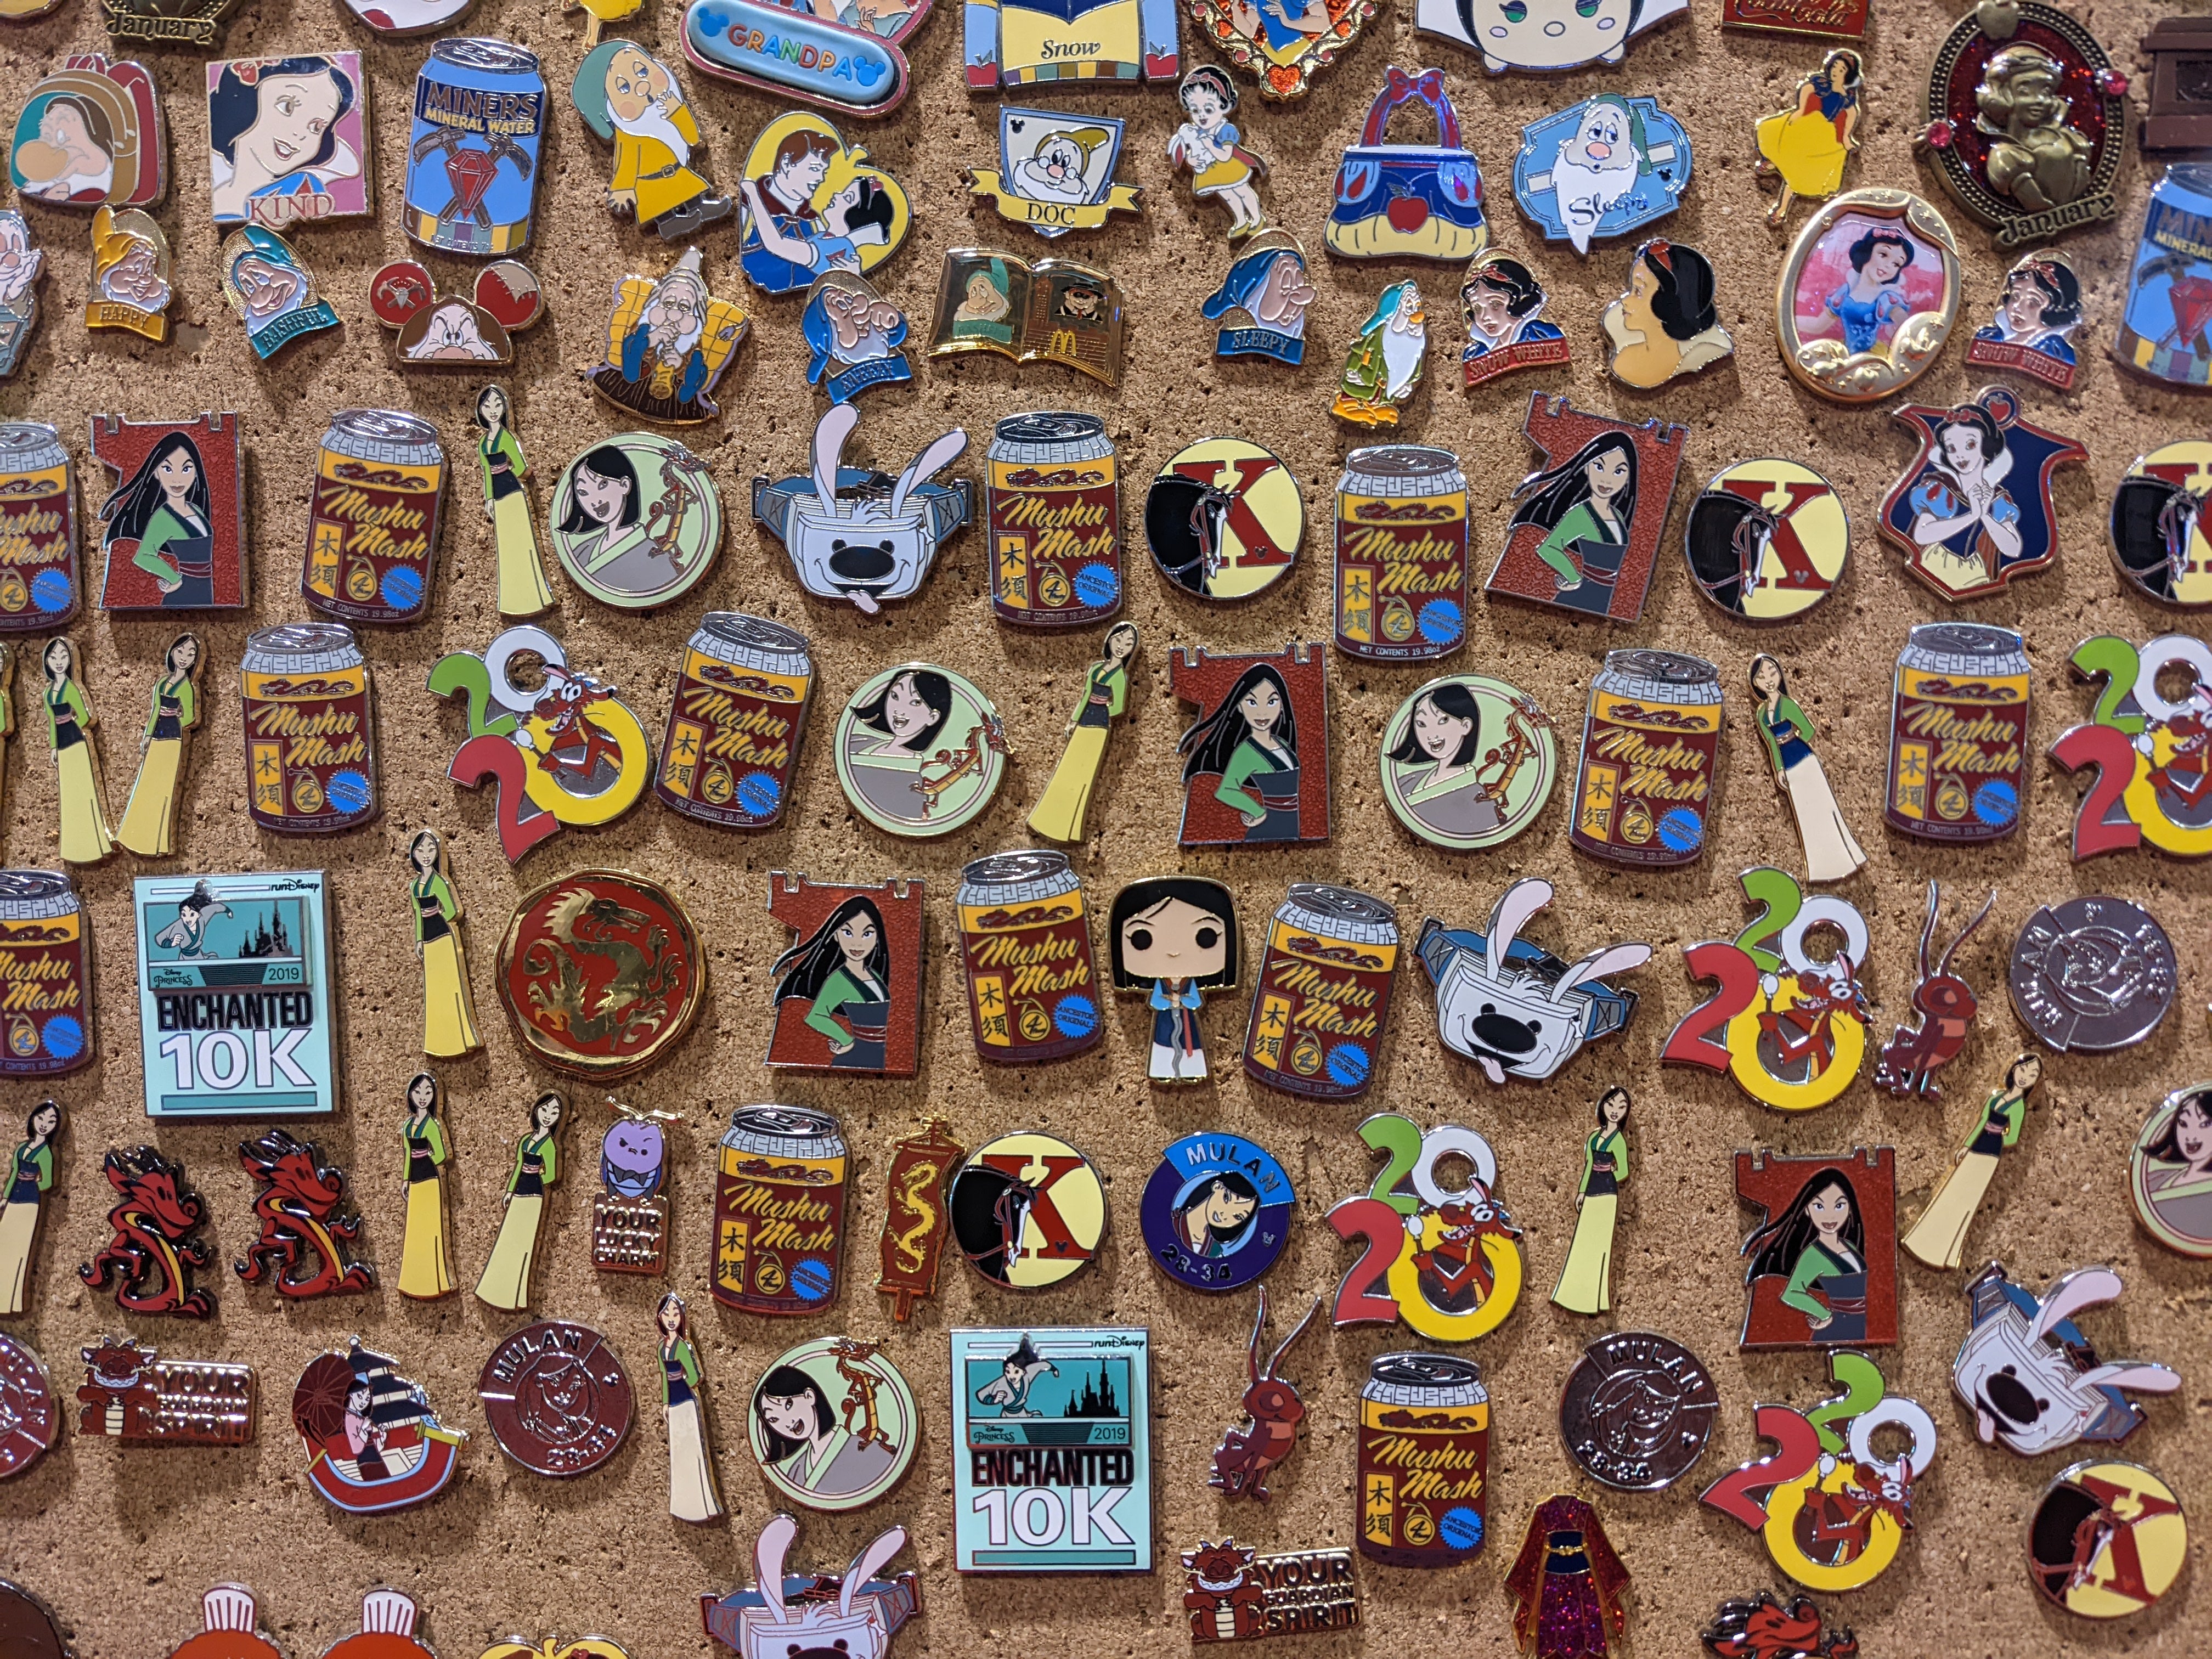 An assortment of Mulan pins on corkboard in a booth at D23